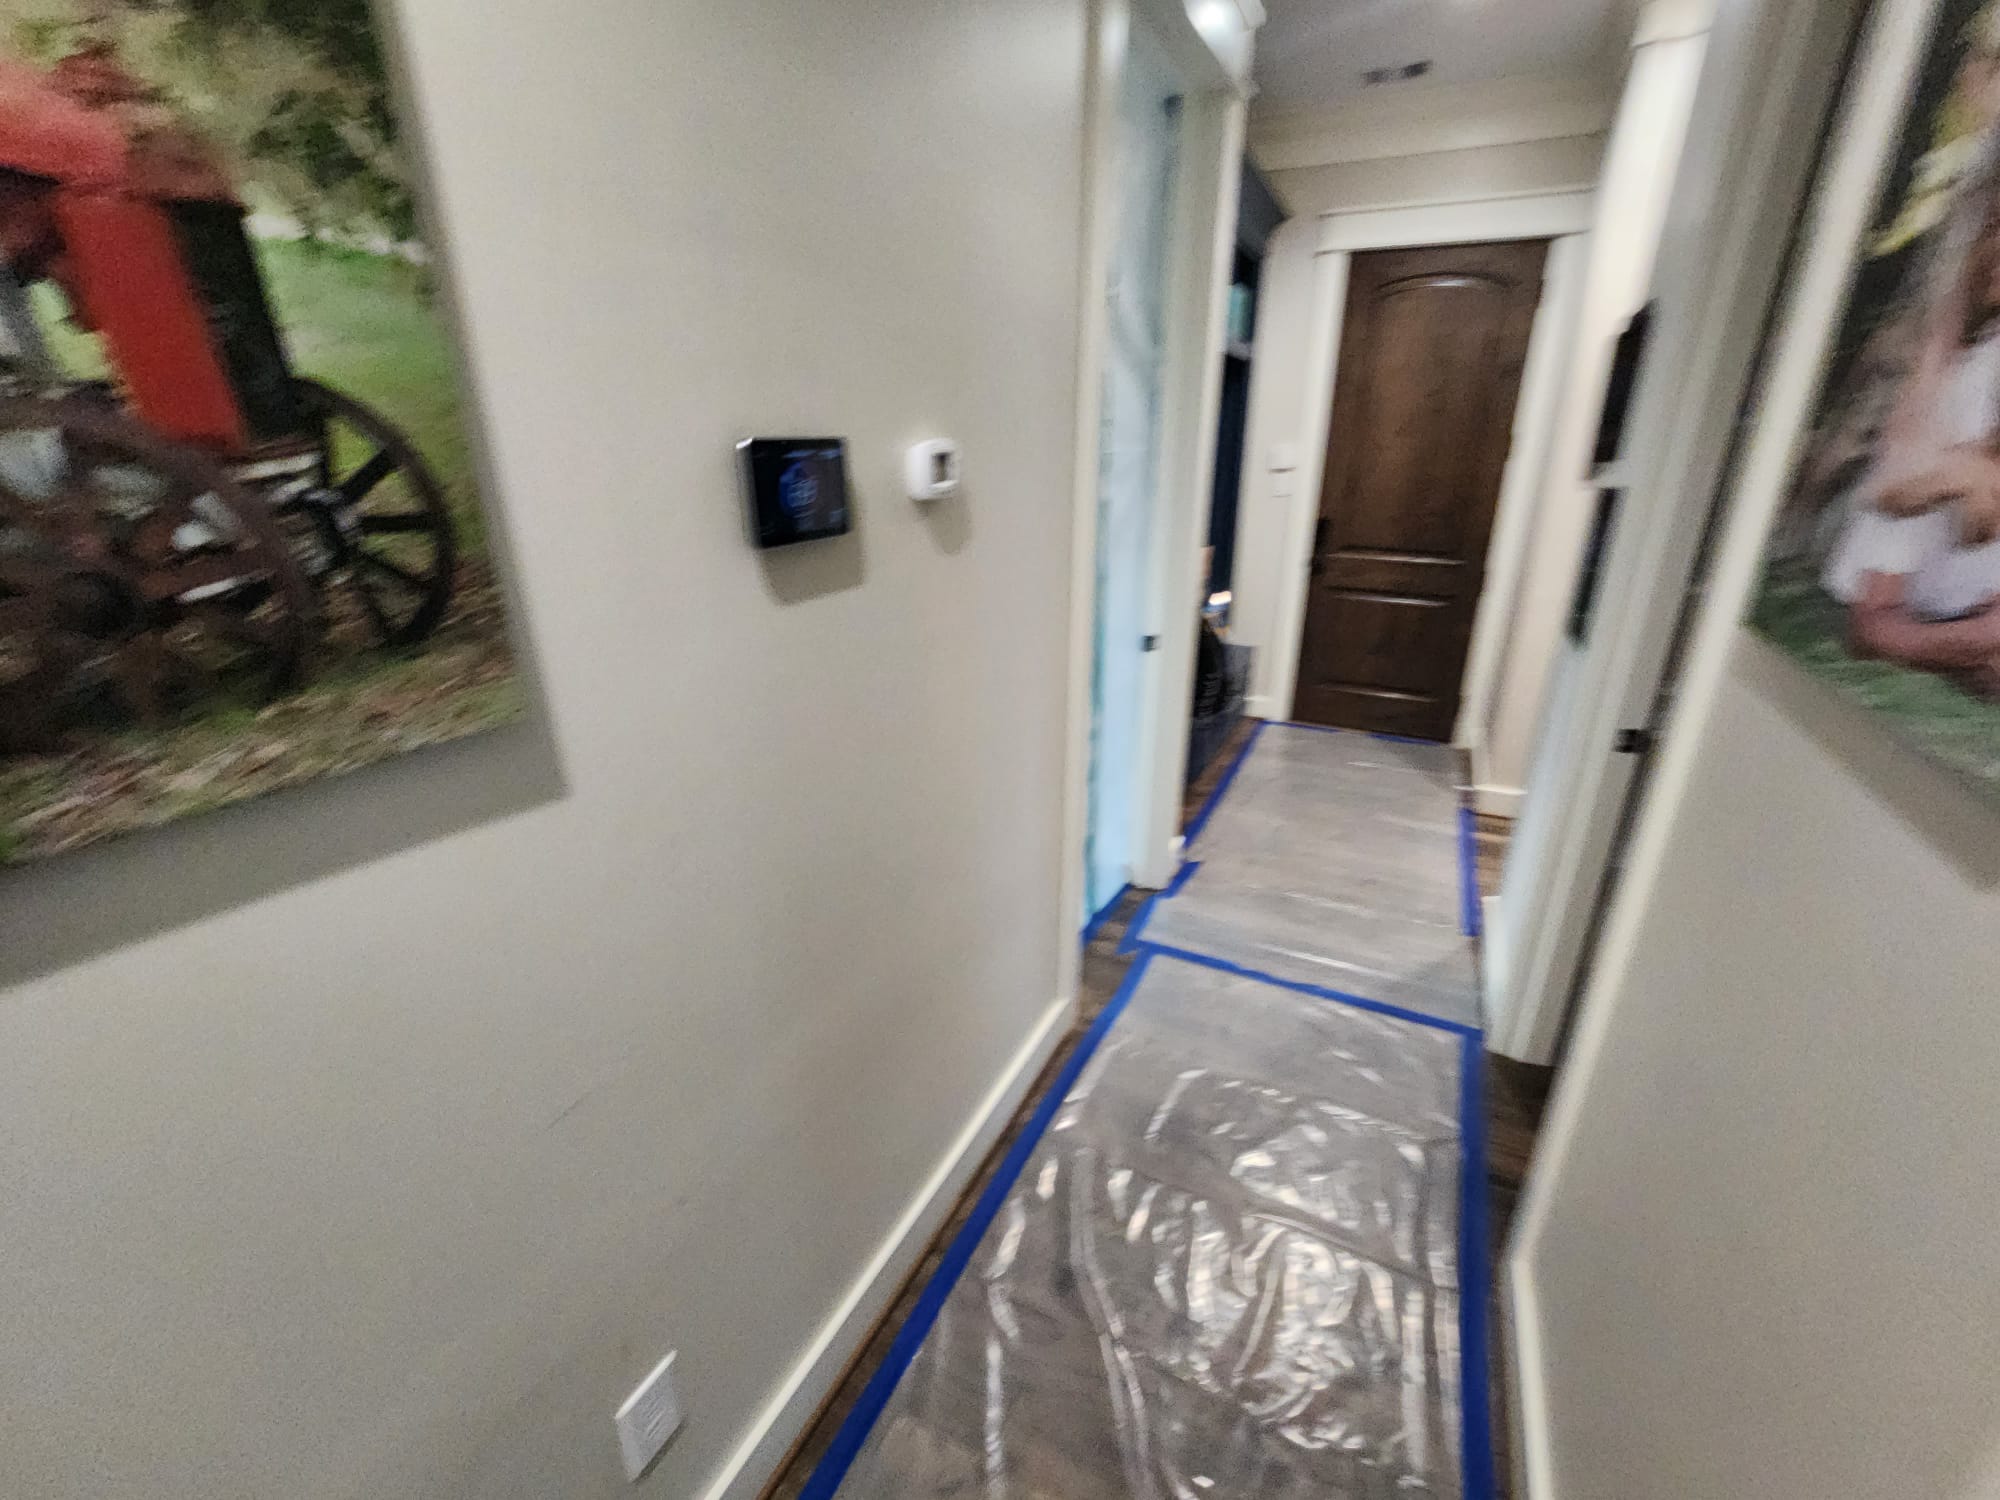 Category 3 water damage restoration and mold remediation. 